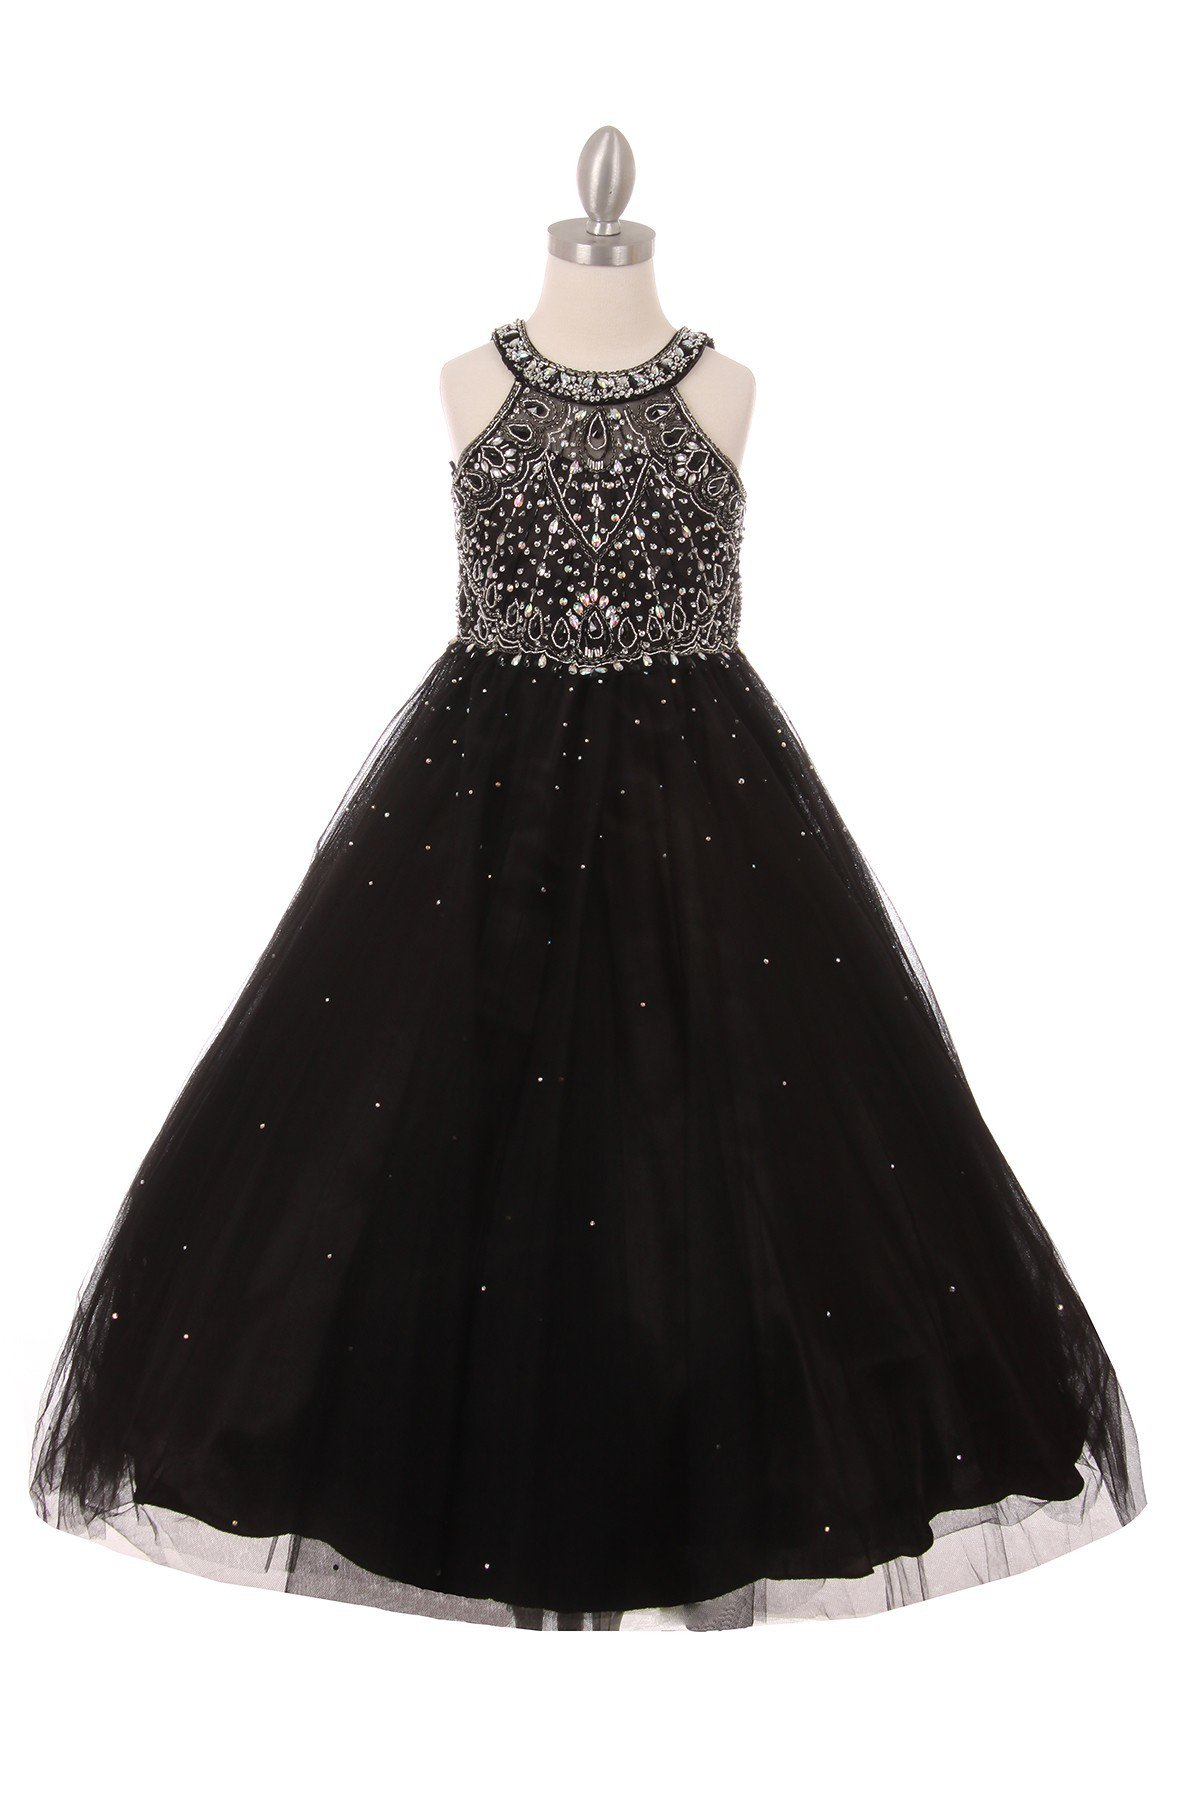 black rhinestone halter neck party dress. Super soft tulle skirt with wire netting on the bottom.  